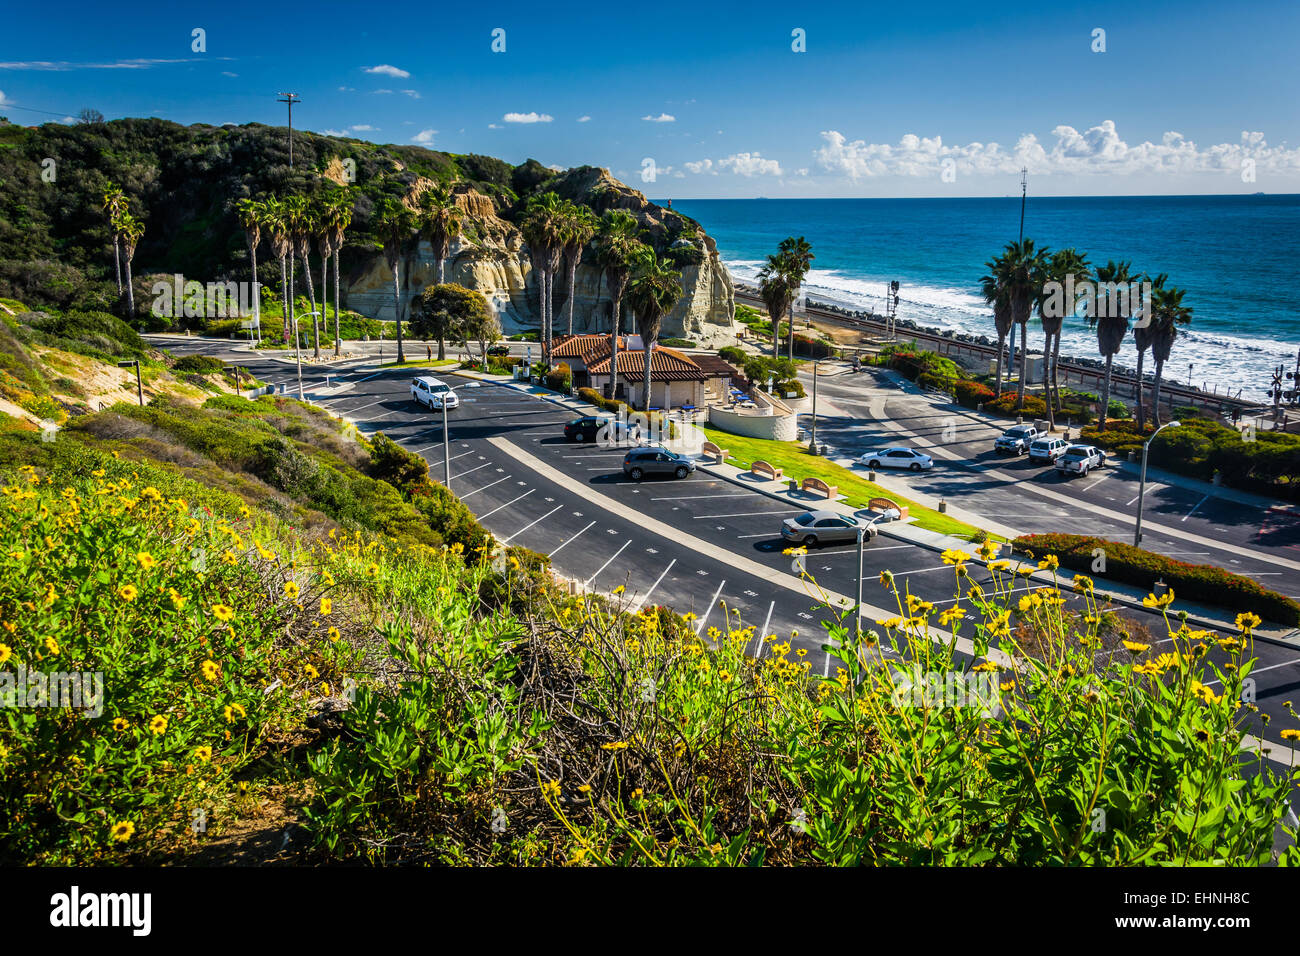 Colorful flowers and view of San Clemente State Beach from Calafia Park, in San Clemente, California. Stock Photo